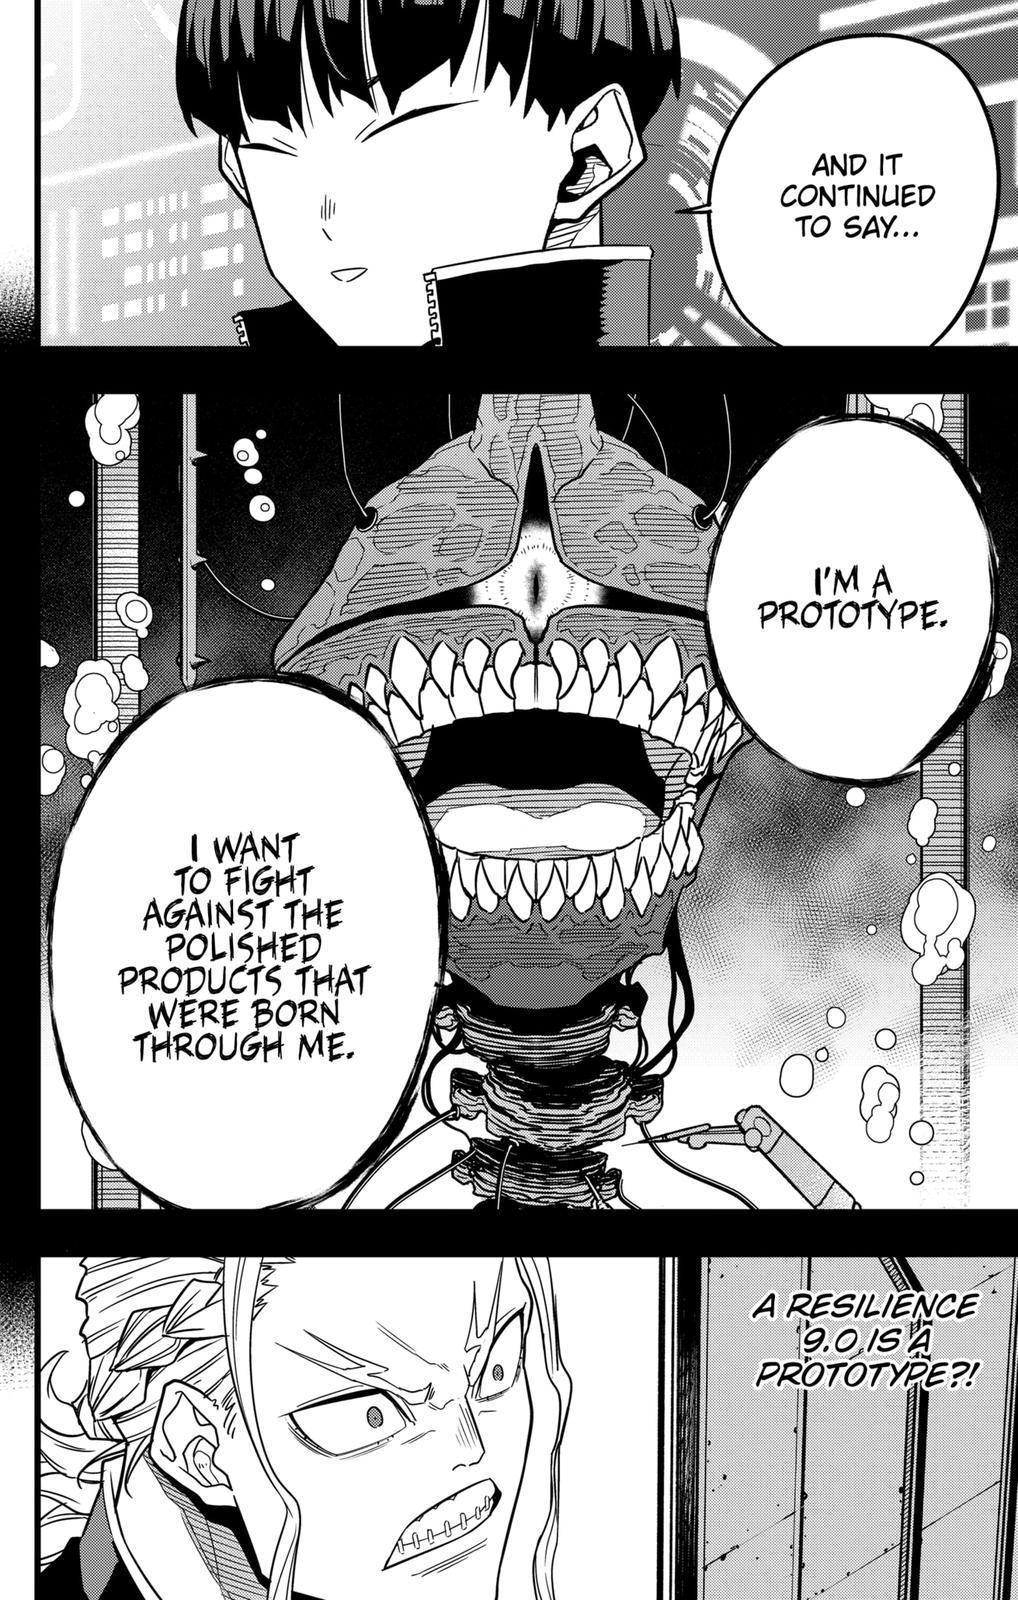 Kaiju no 8 Chapter 57, monster #8 chapter 57